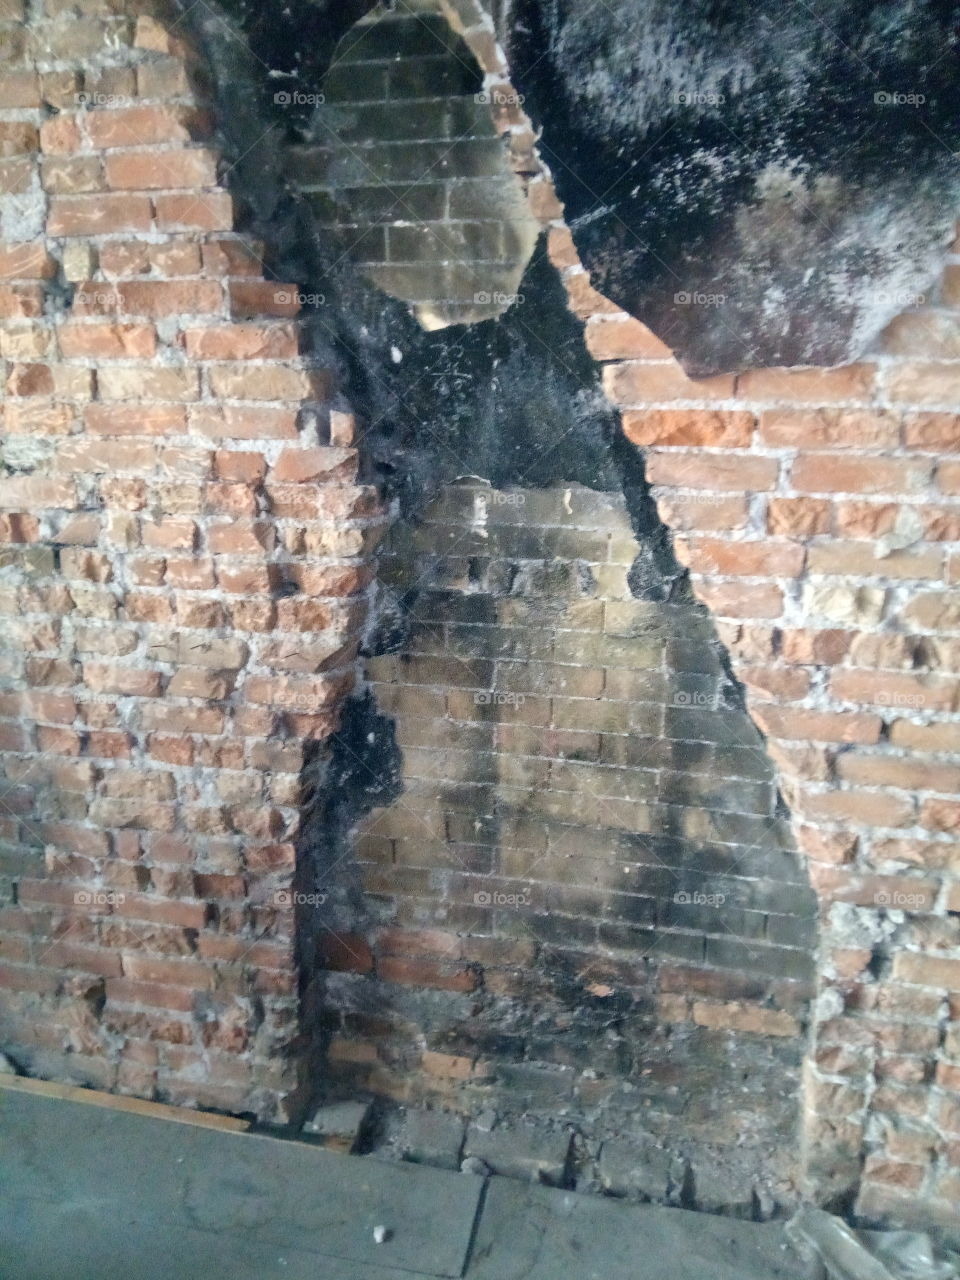 the scar from a old fireplace.